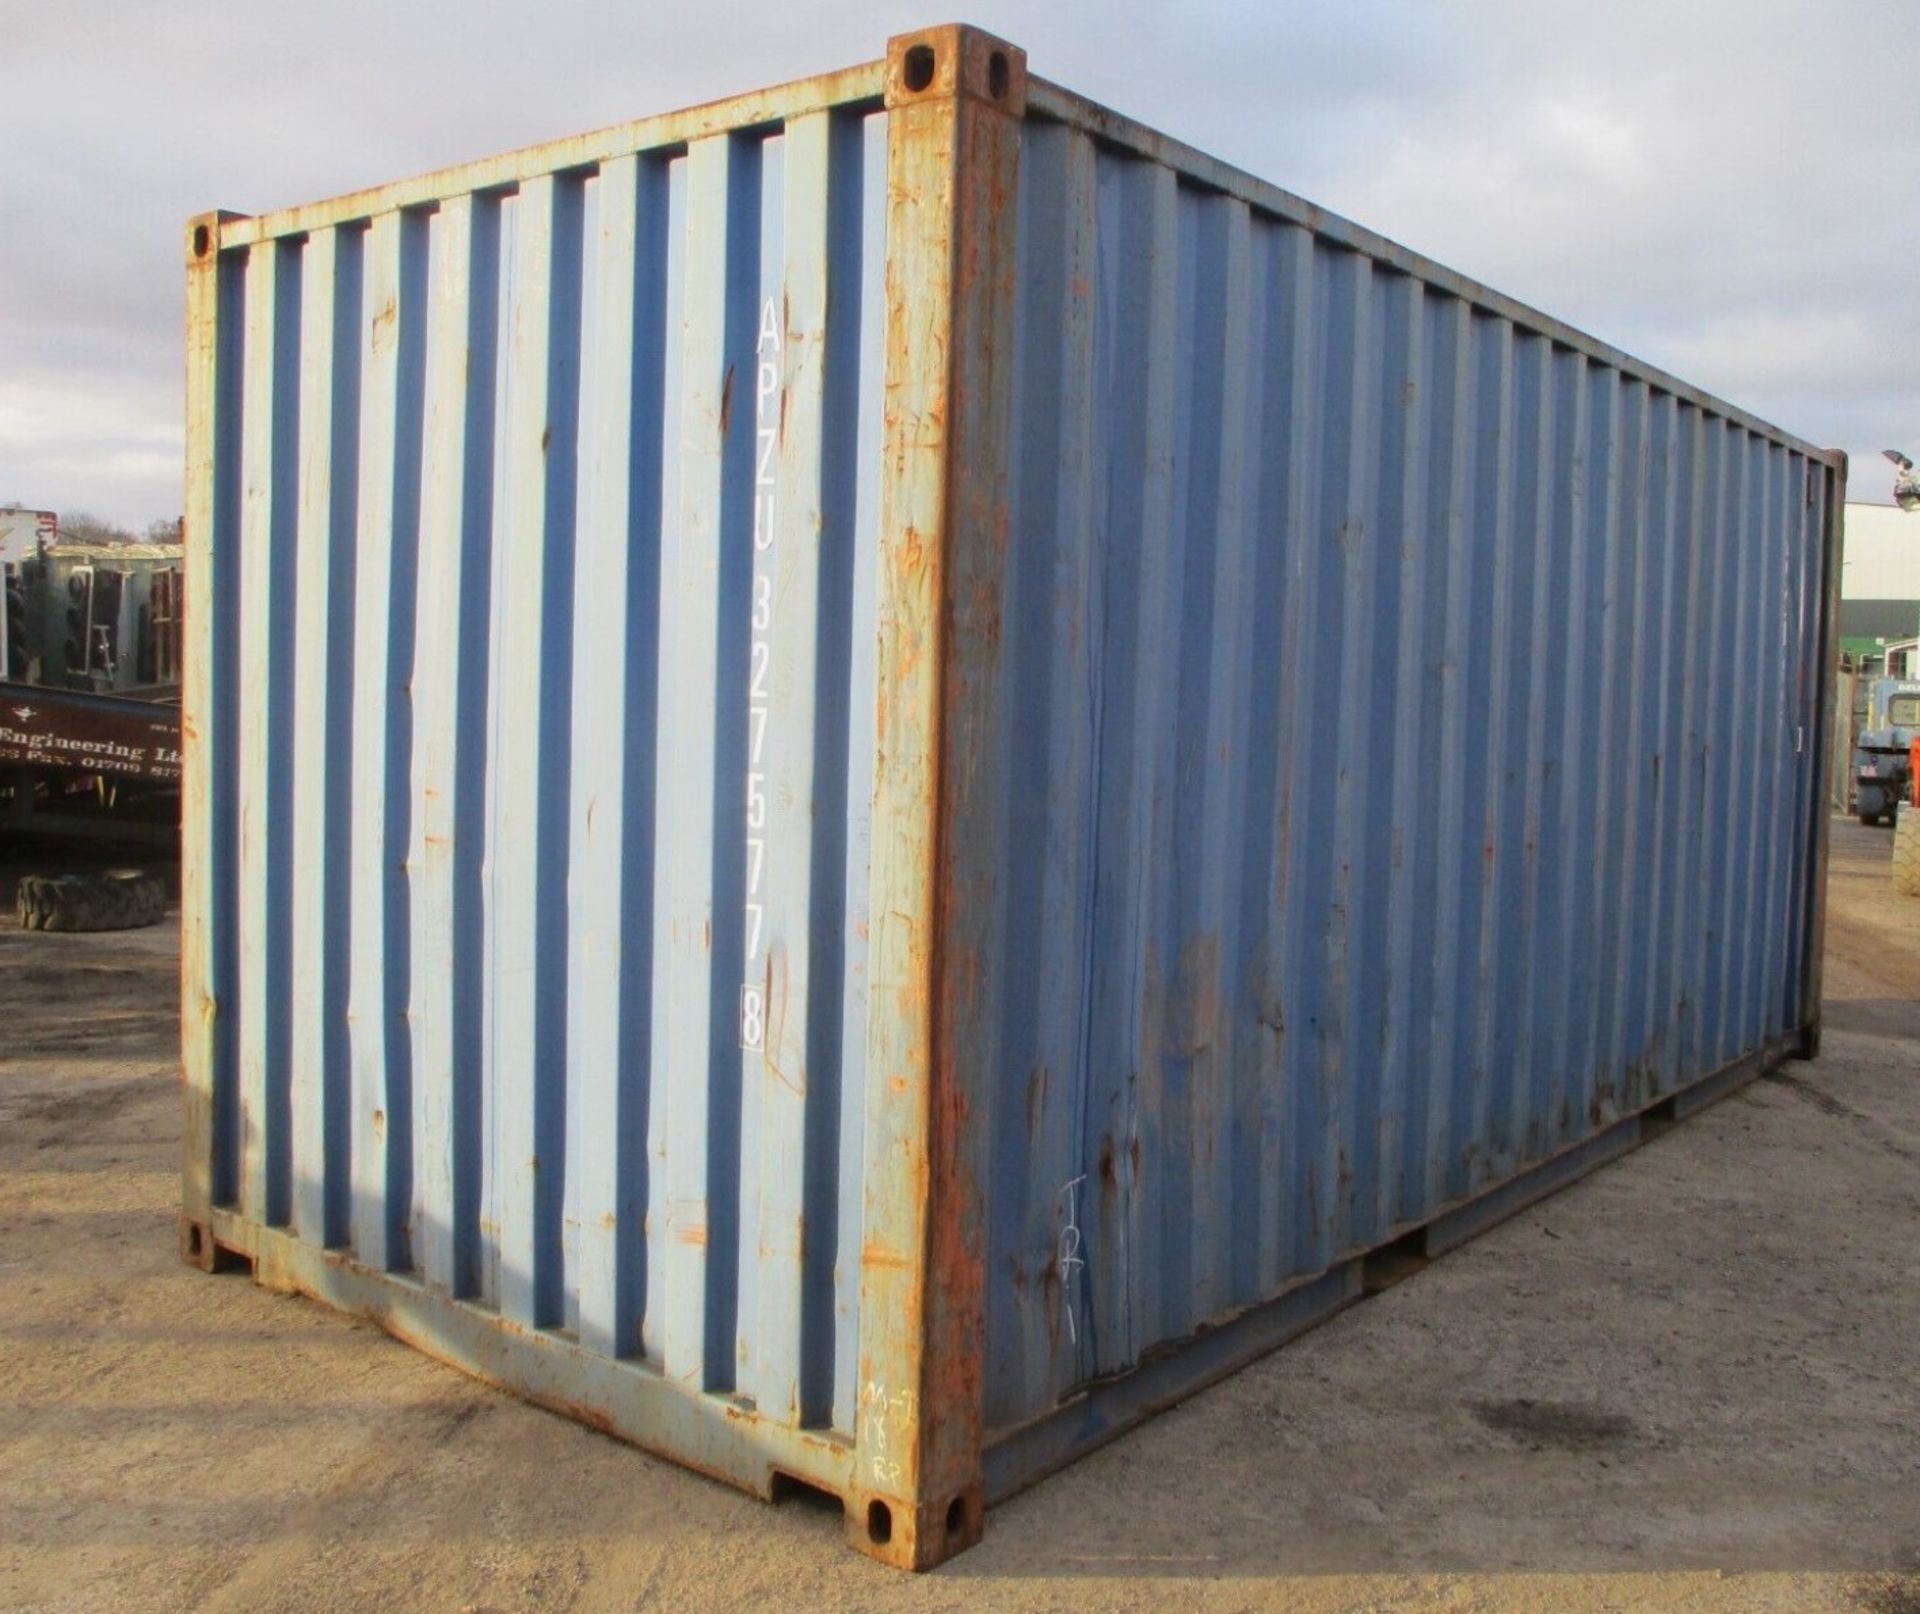 20 FEET LONG X 8 FEET WIDE SHIPPING CONTAINER: VERSATILE STORAGE SOLUTION - Image 2 of 10